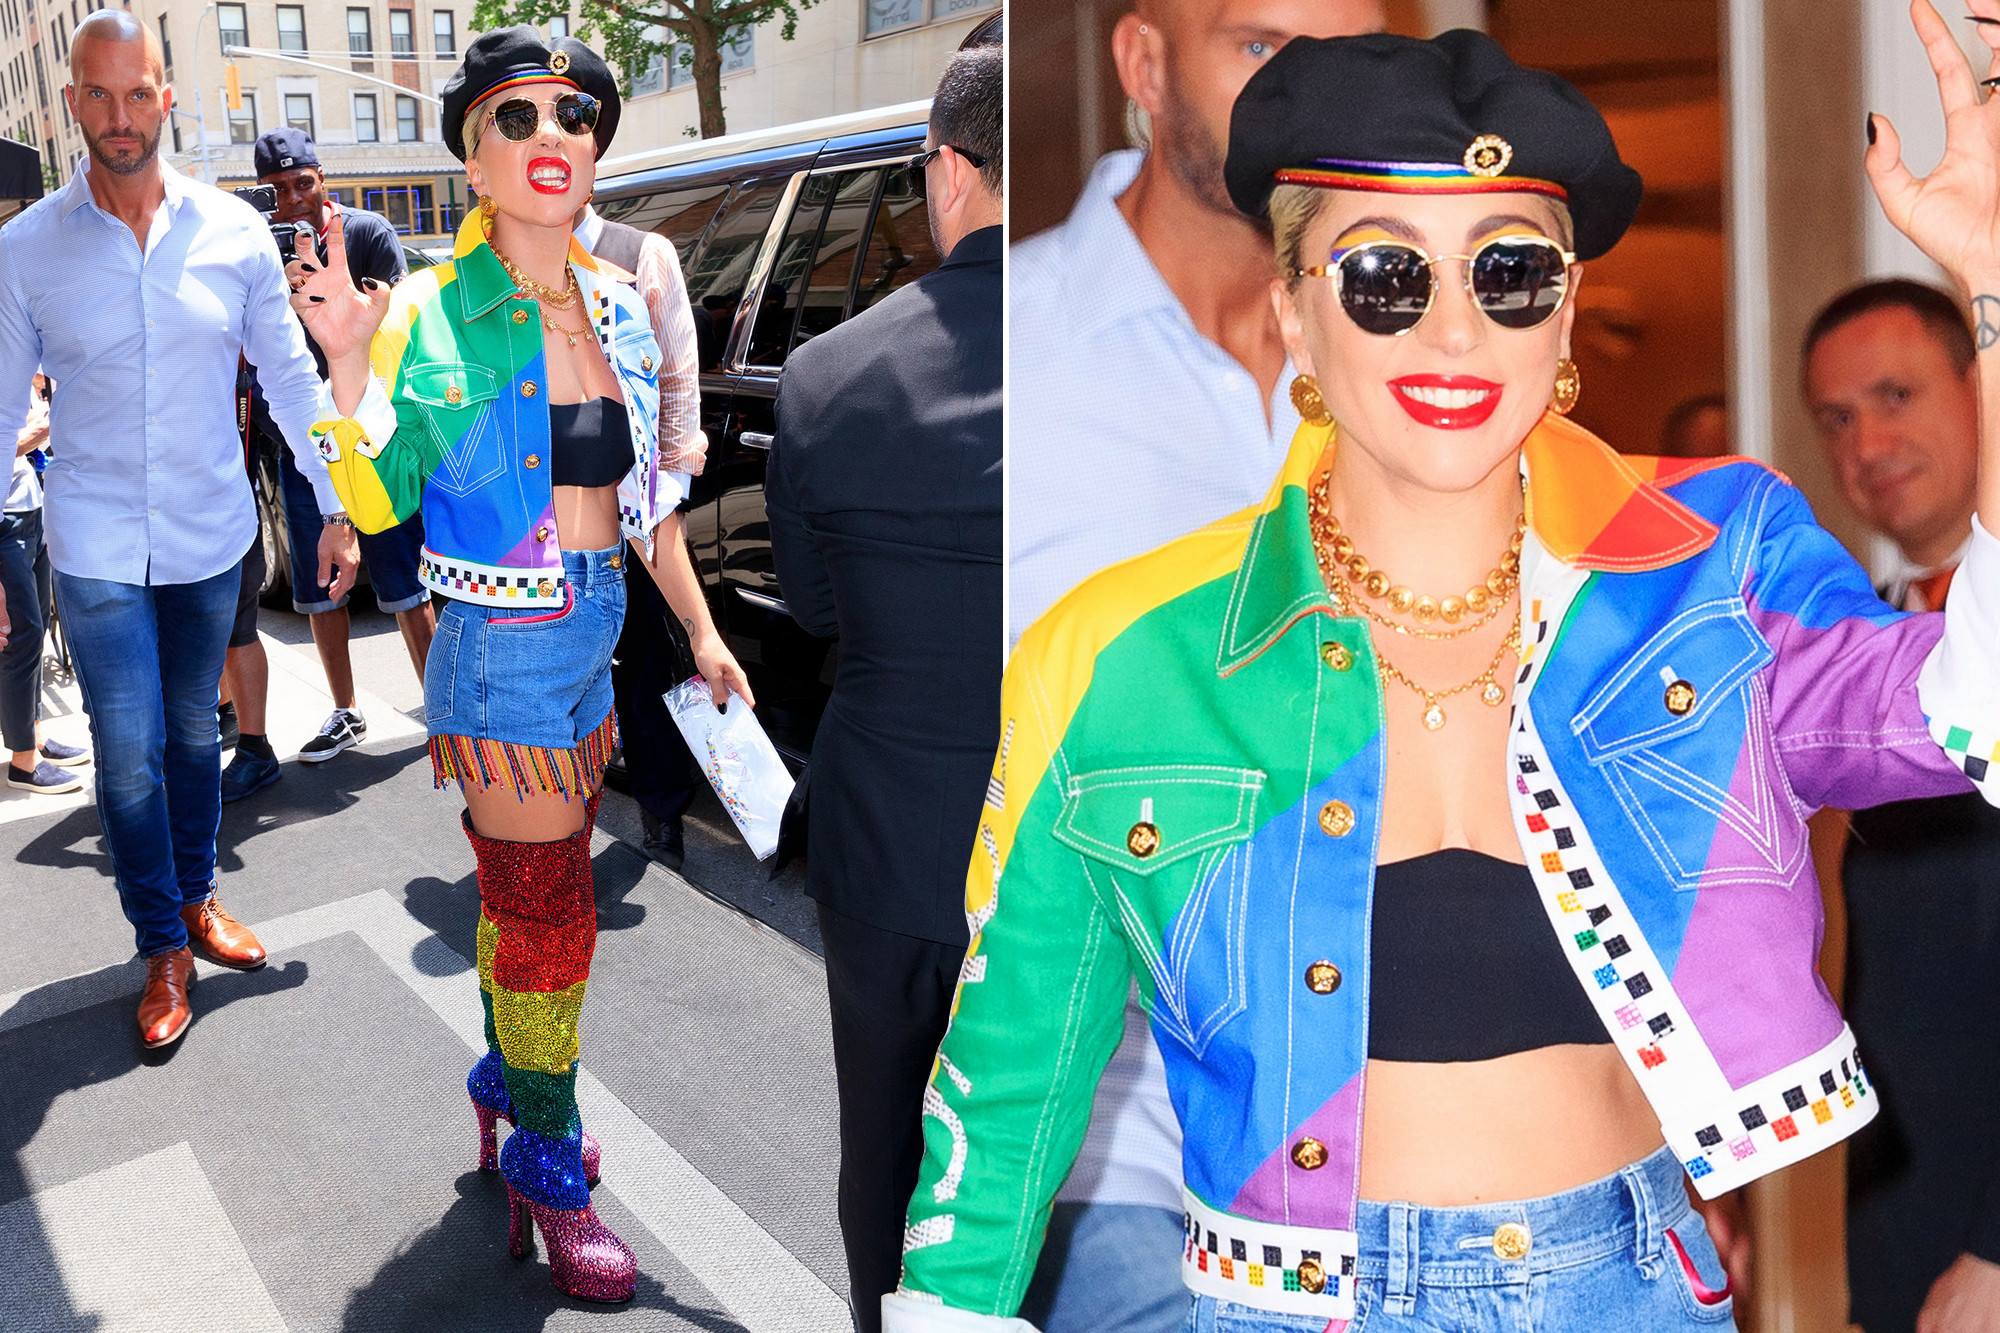 NEW YORK, NY - JUNE 28:  Lady Gaga shows off her Pride fashion on June 28, 2019 in New York City.  (Photo by Gotham/GC Images)